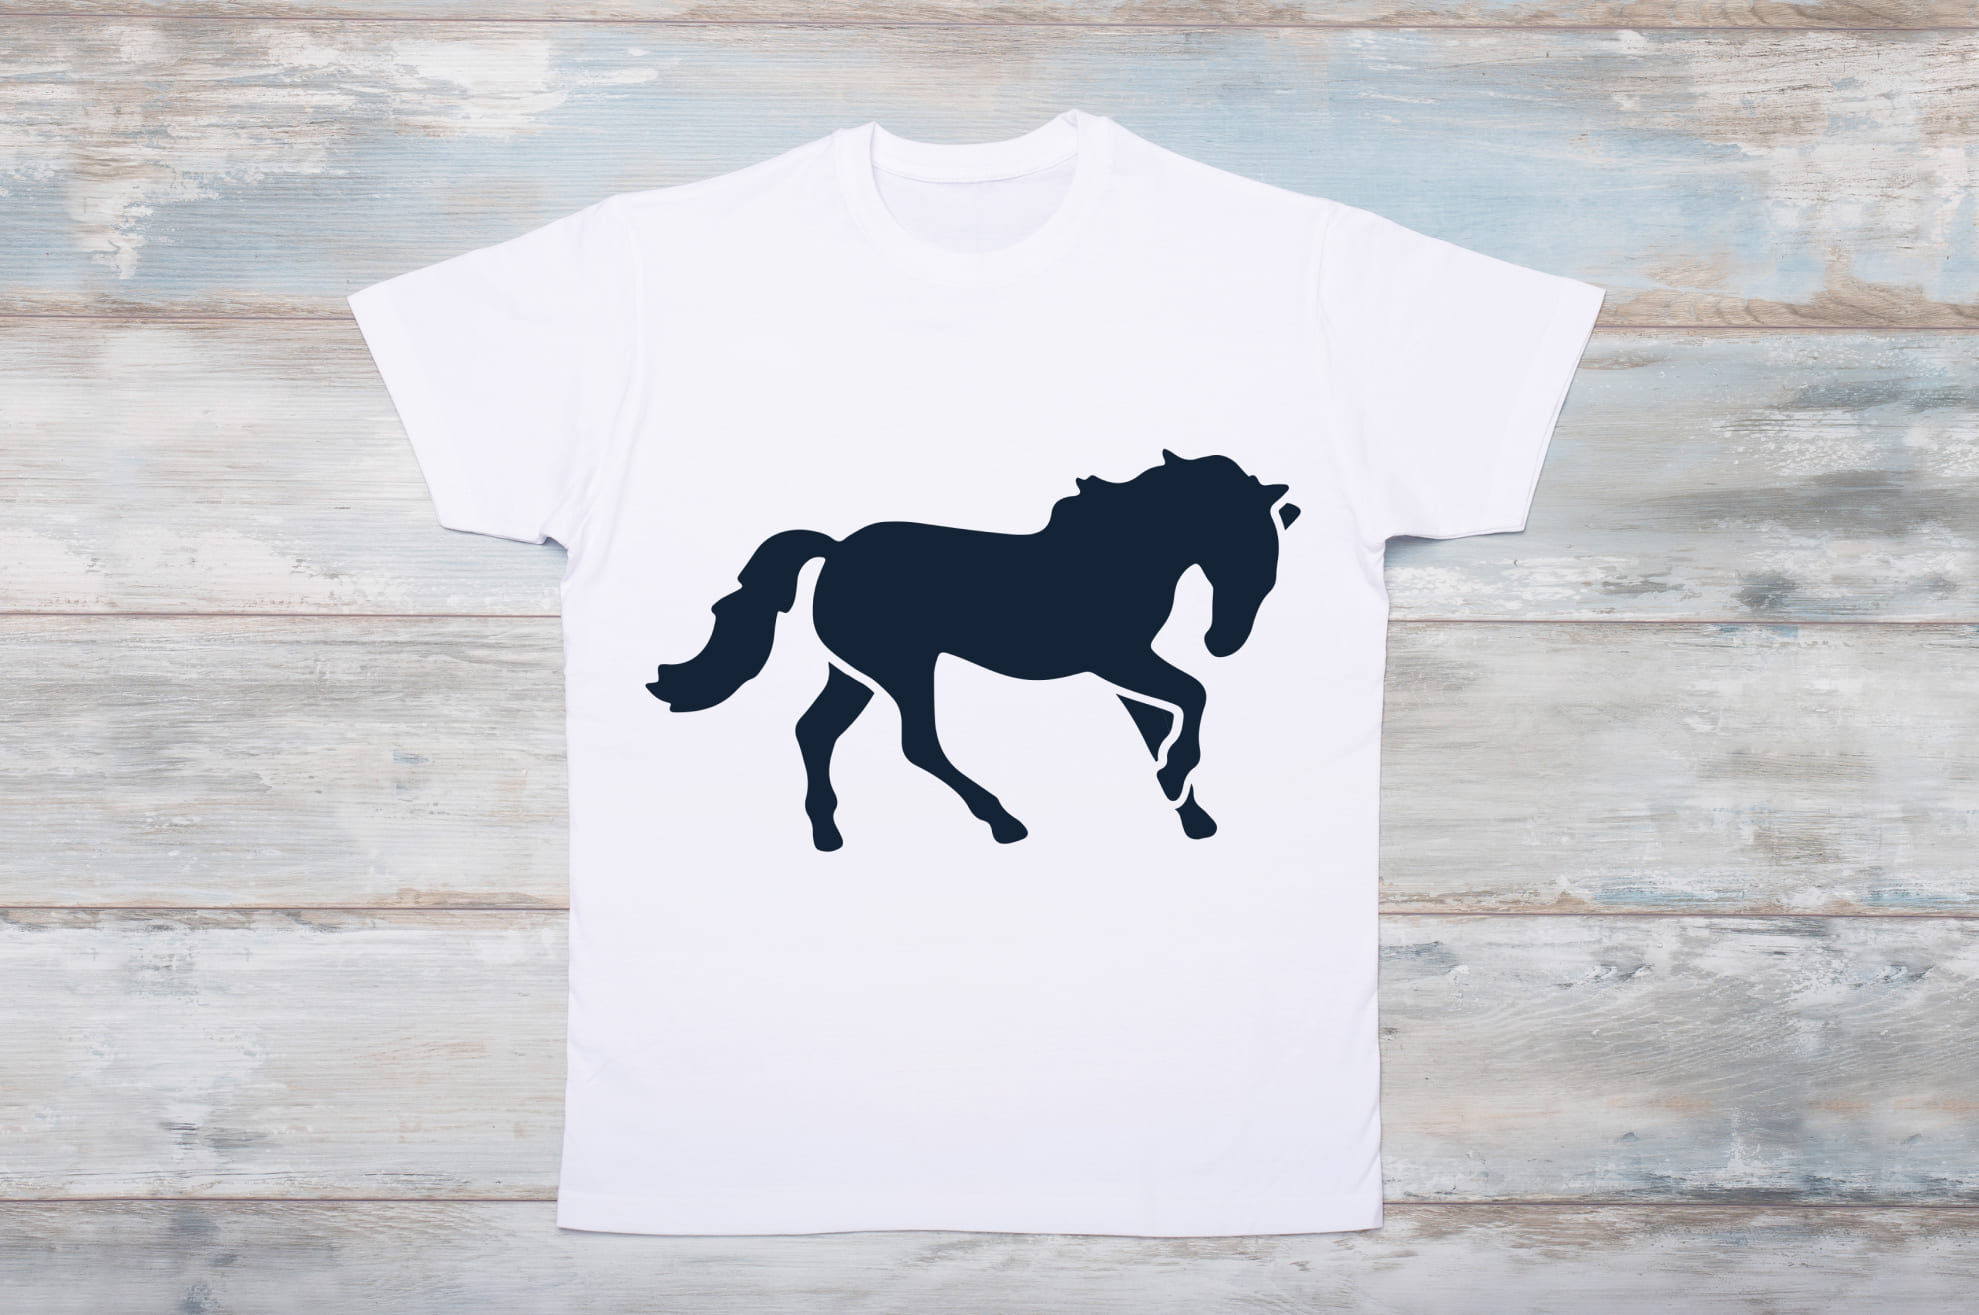 White t-shirt with a black silhouette of a cute horse on the wooden background.